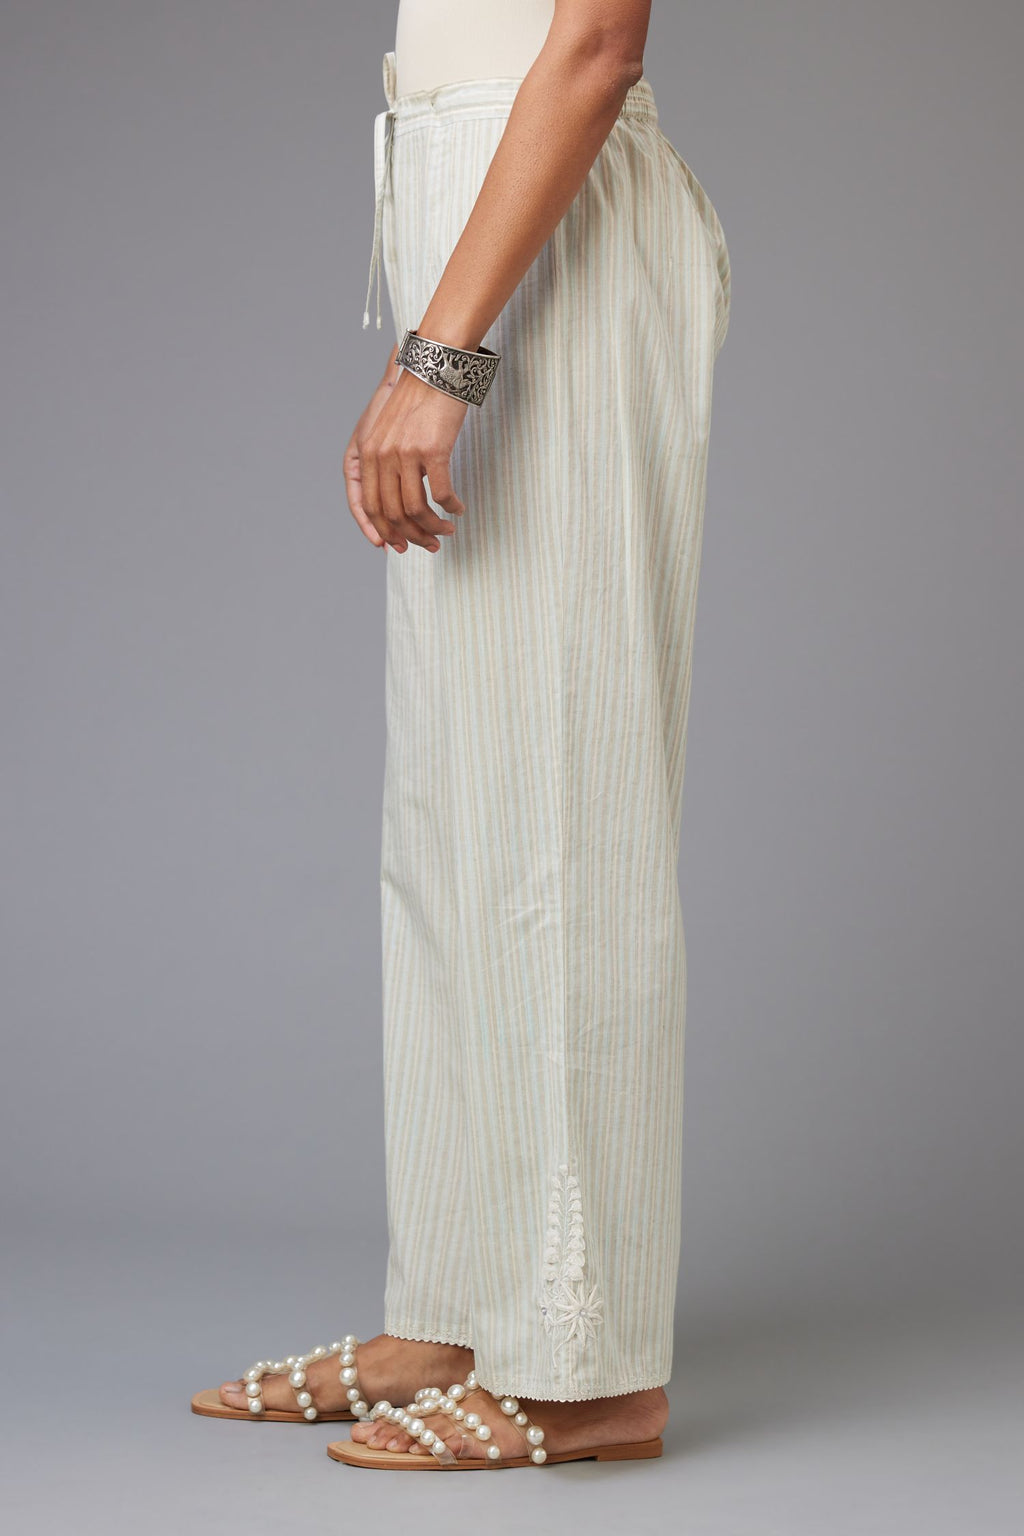 Blue and grey printed stripe Cotton straight pants with a chiffon embroidered boota at the hem.